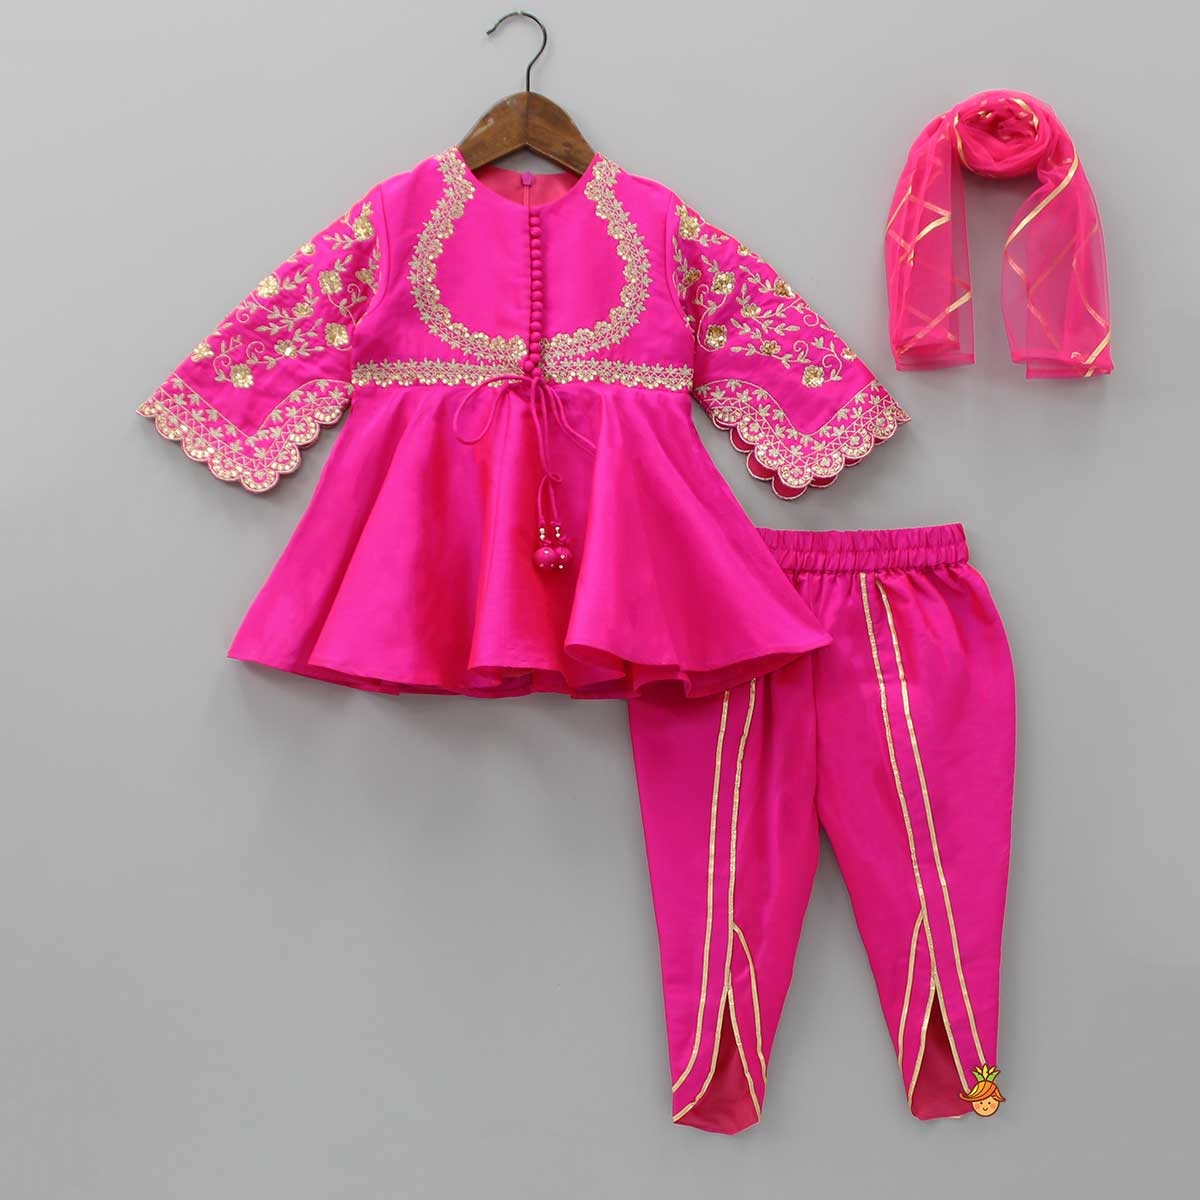 Red and blue color dhoti suit | Dresses kids girl, Kids dress, Indian gowns  dresses